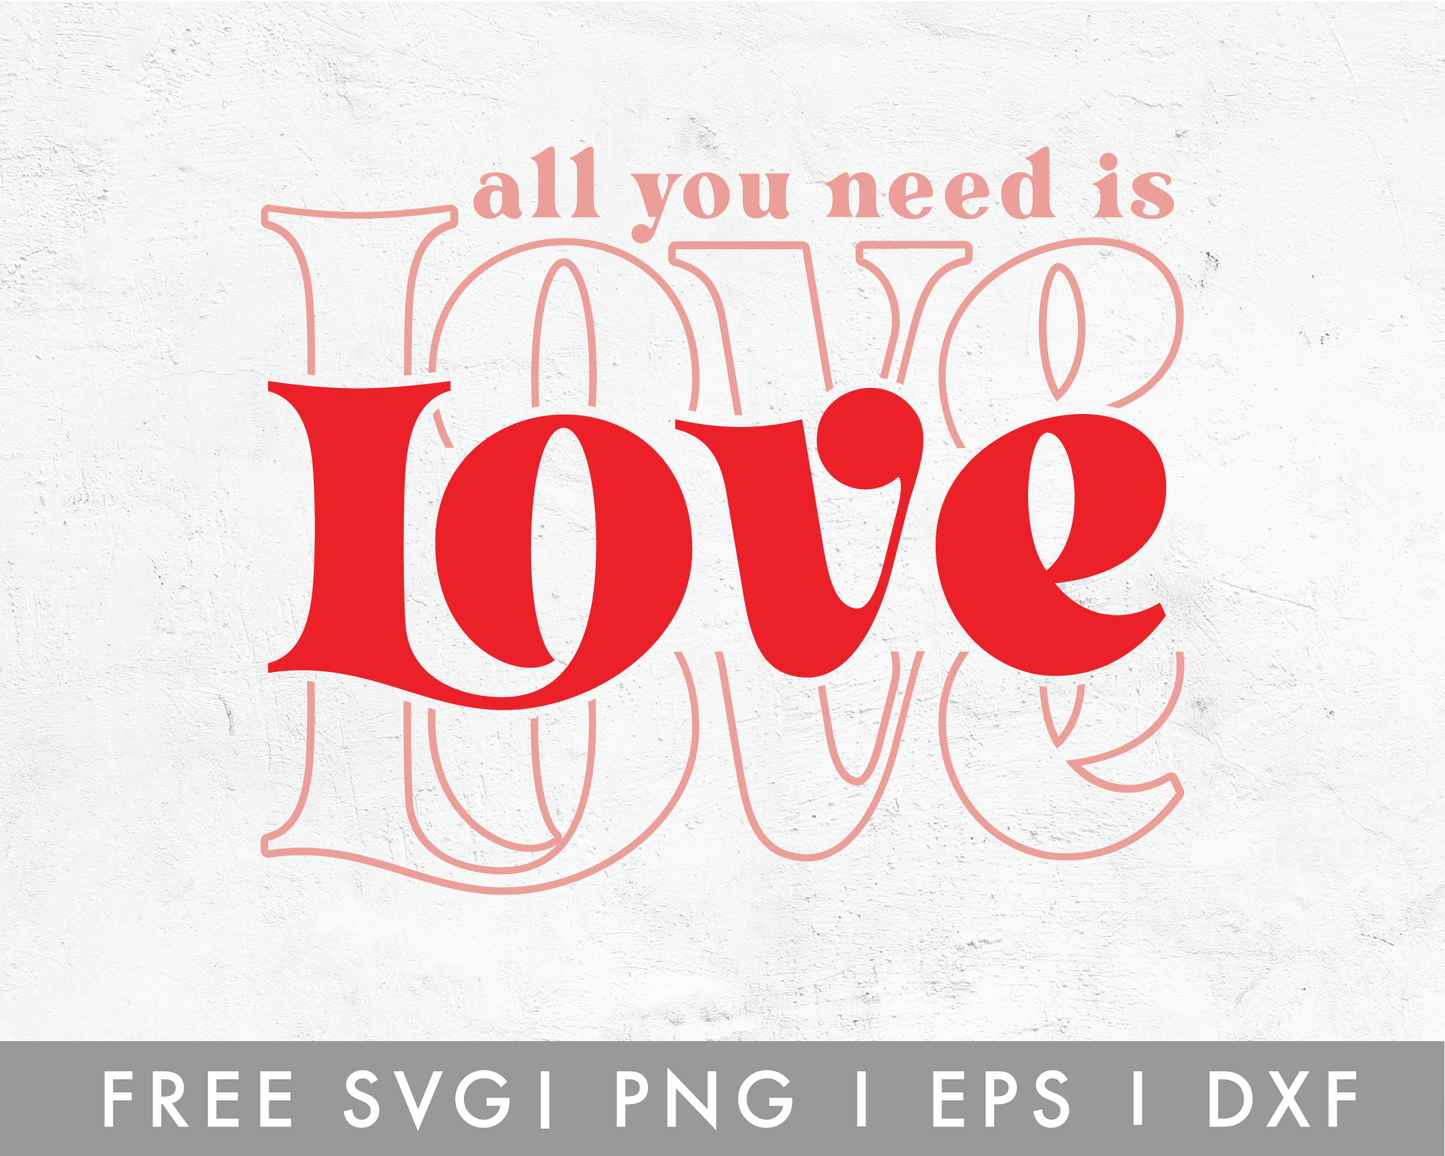 FREE All You Need Is Love SVG